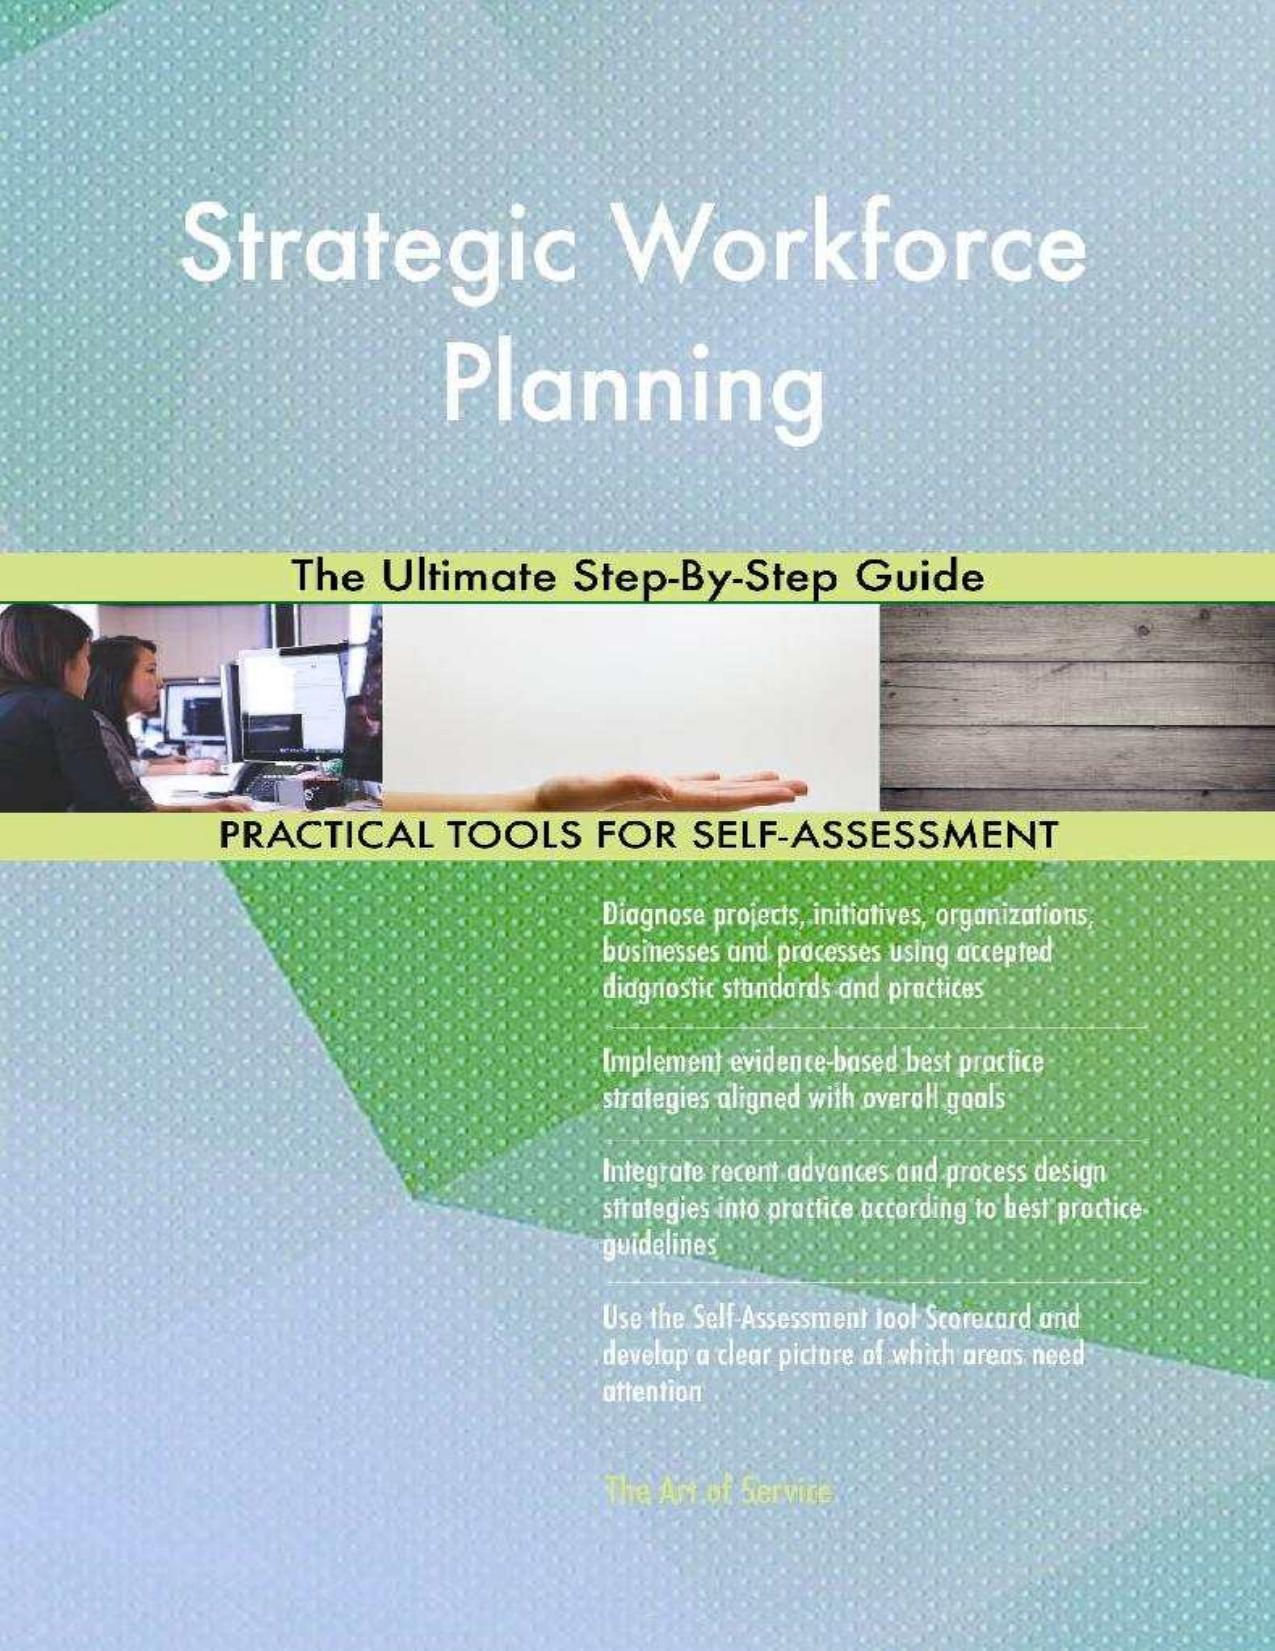 Strategic Workforce Planning The Ultimate Step-By-Step Guide  by Gerardus Blokdyk